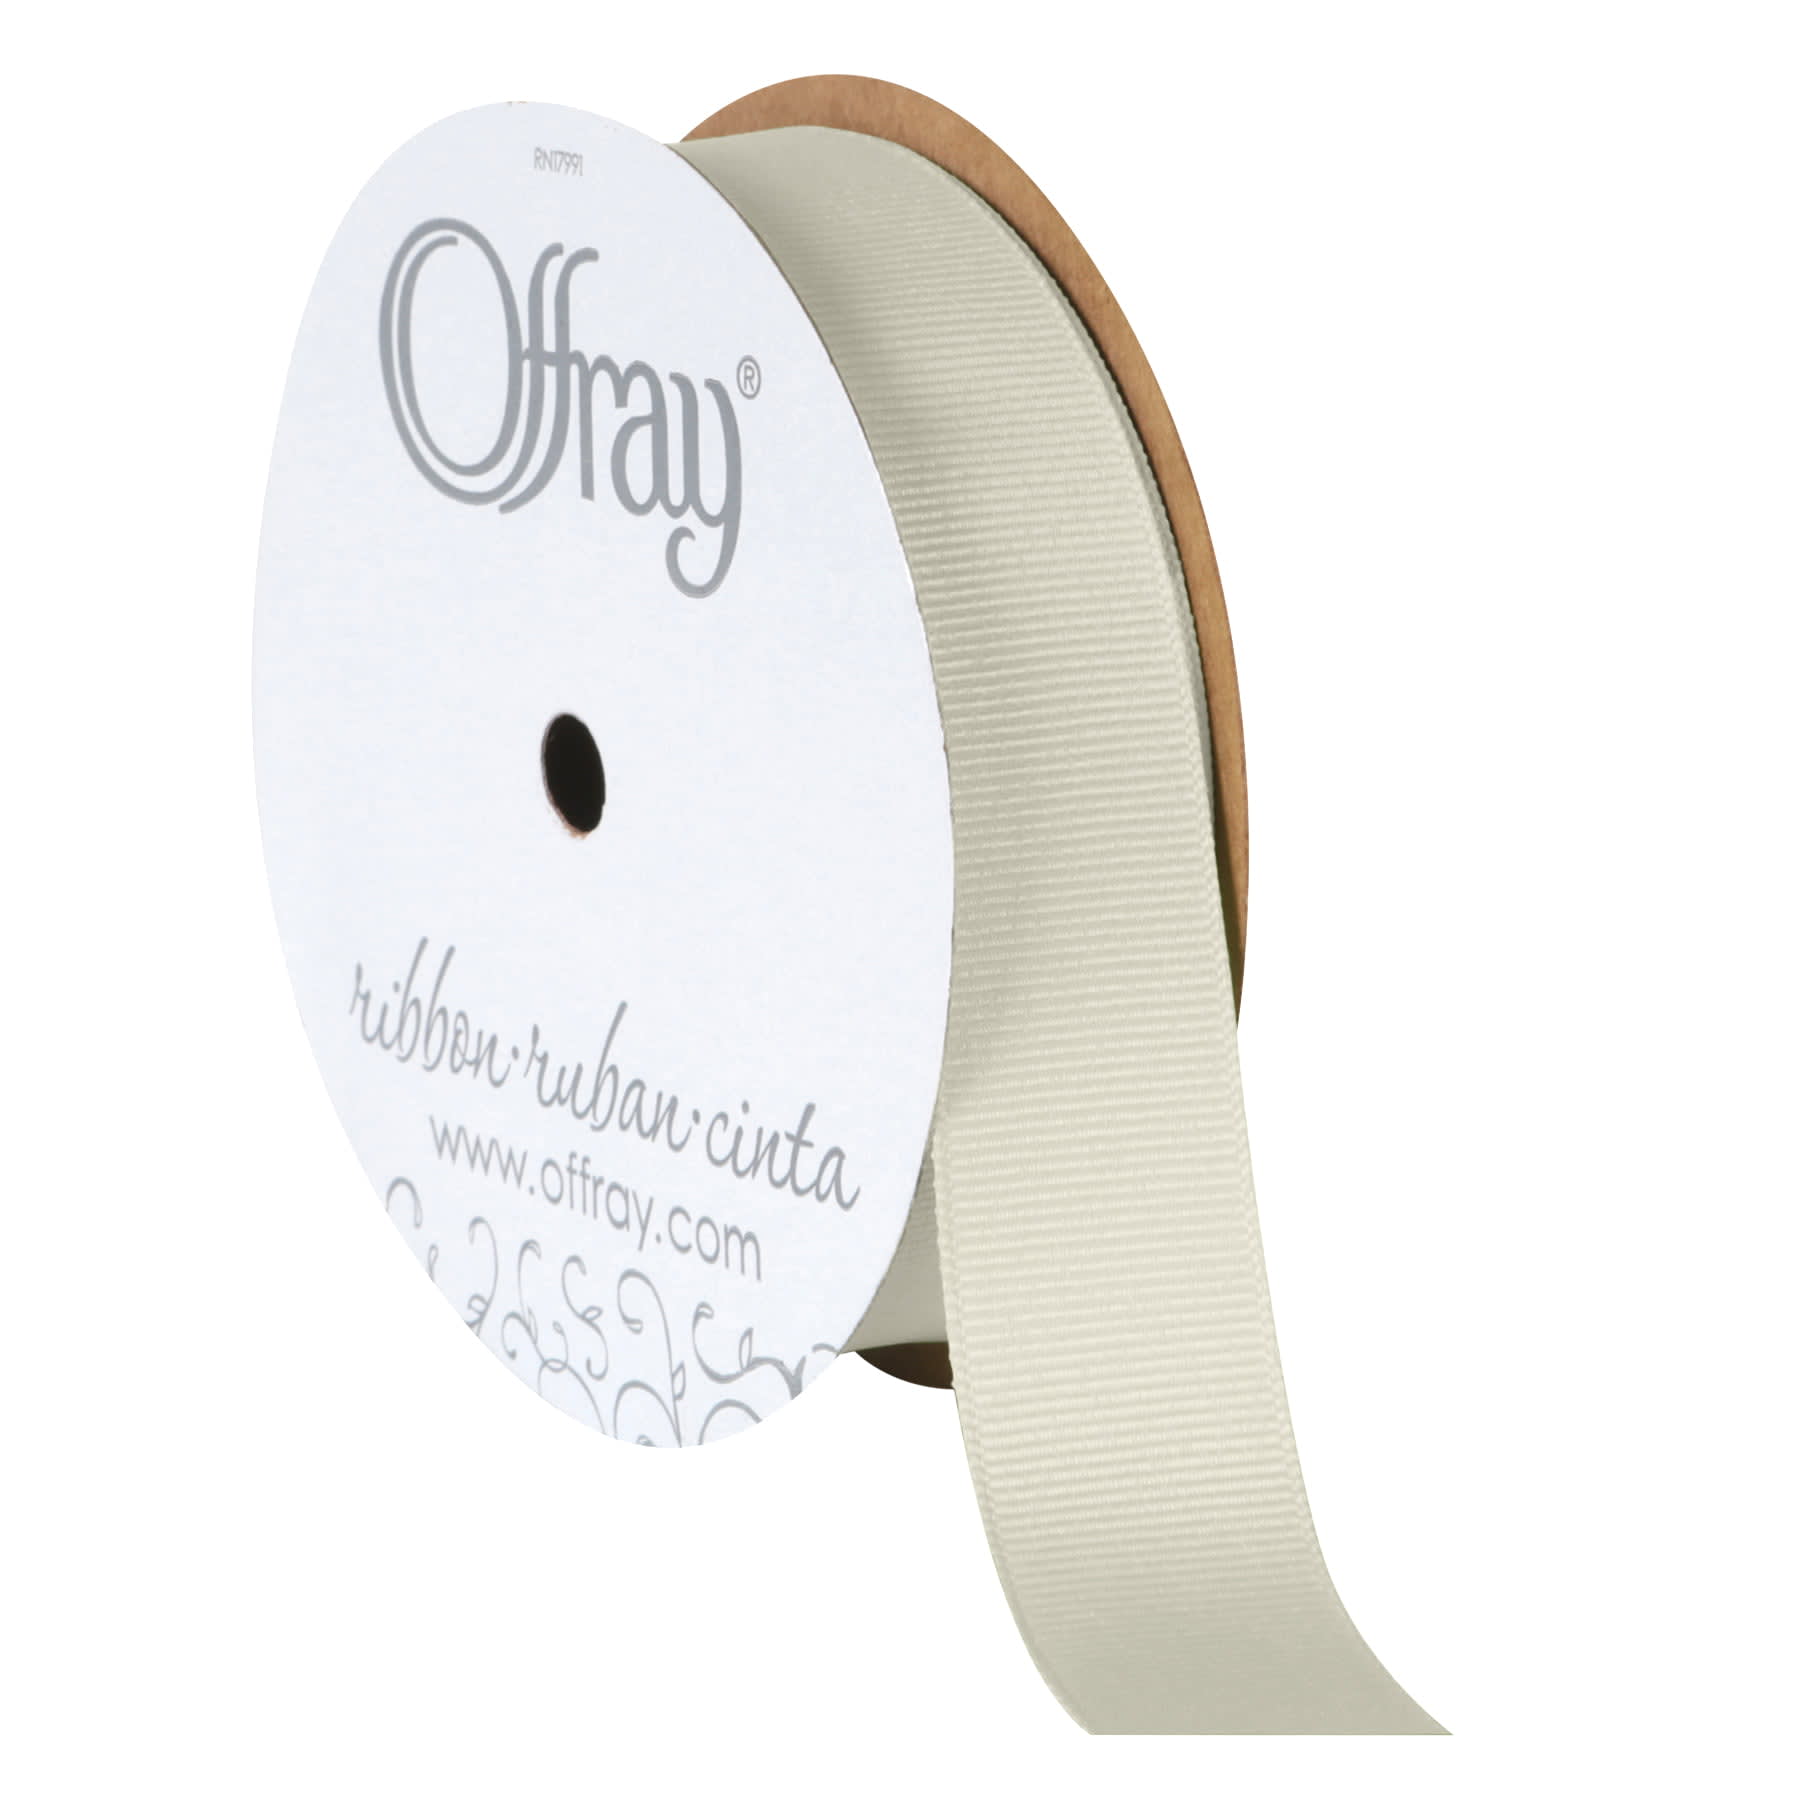 Offray Ribbon, Maize Yellow 1 1/2 inch Acetate Polyester Outdoor Ribbon, 21  feet - DroneUp Delivery